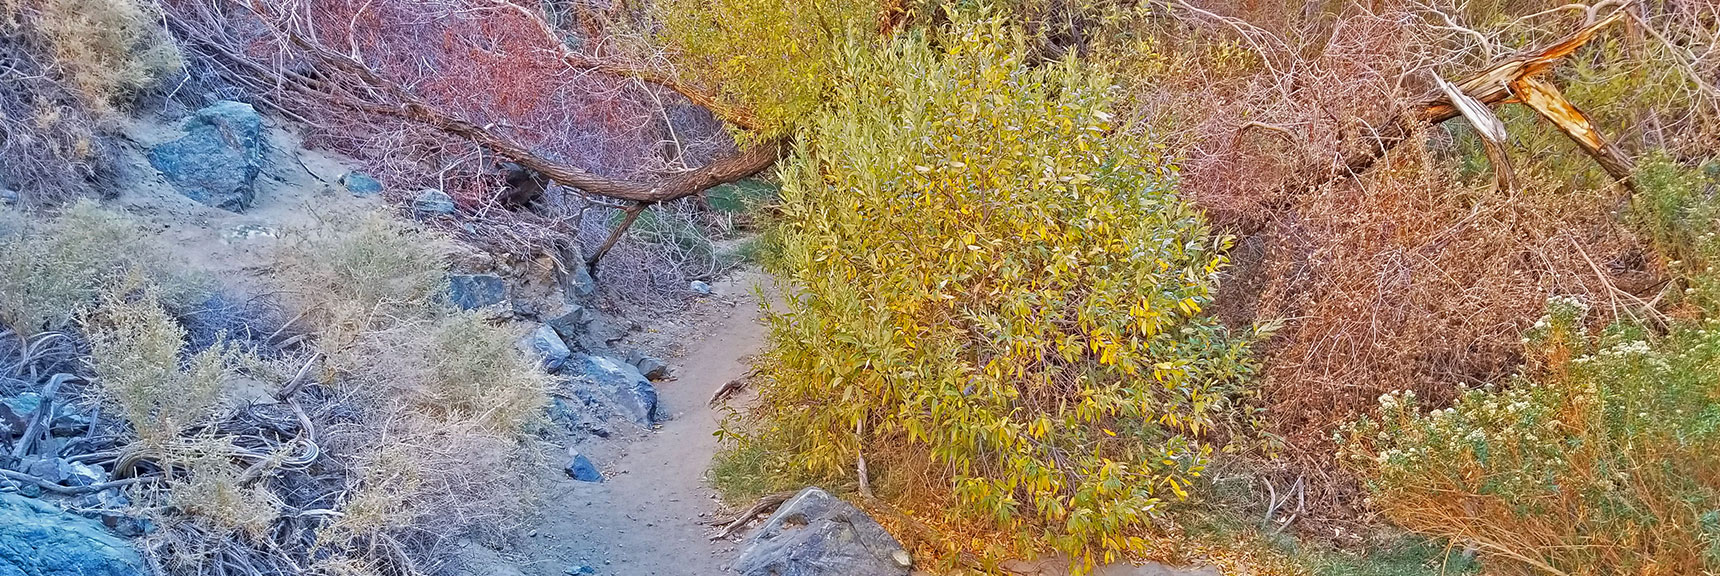 Continuing Up the Canyon. More and Larger Vegetation. | Darwin Falls, Death Valley National Park, California